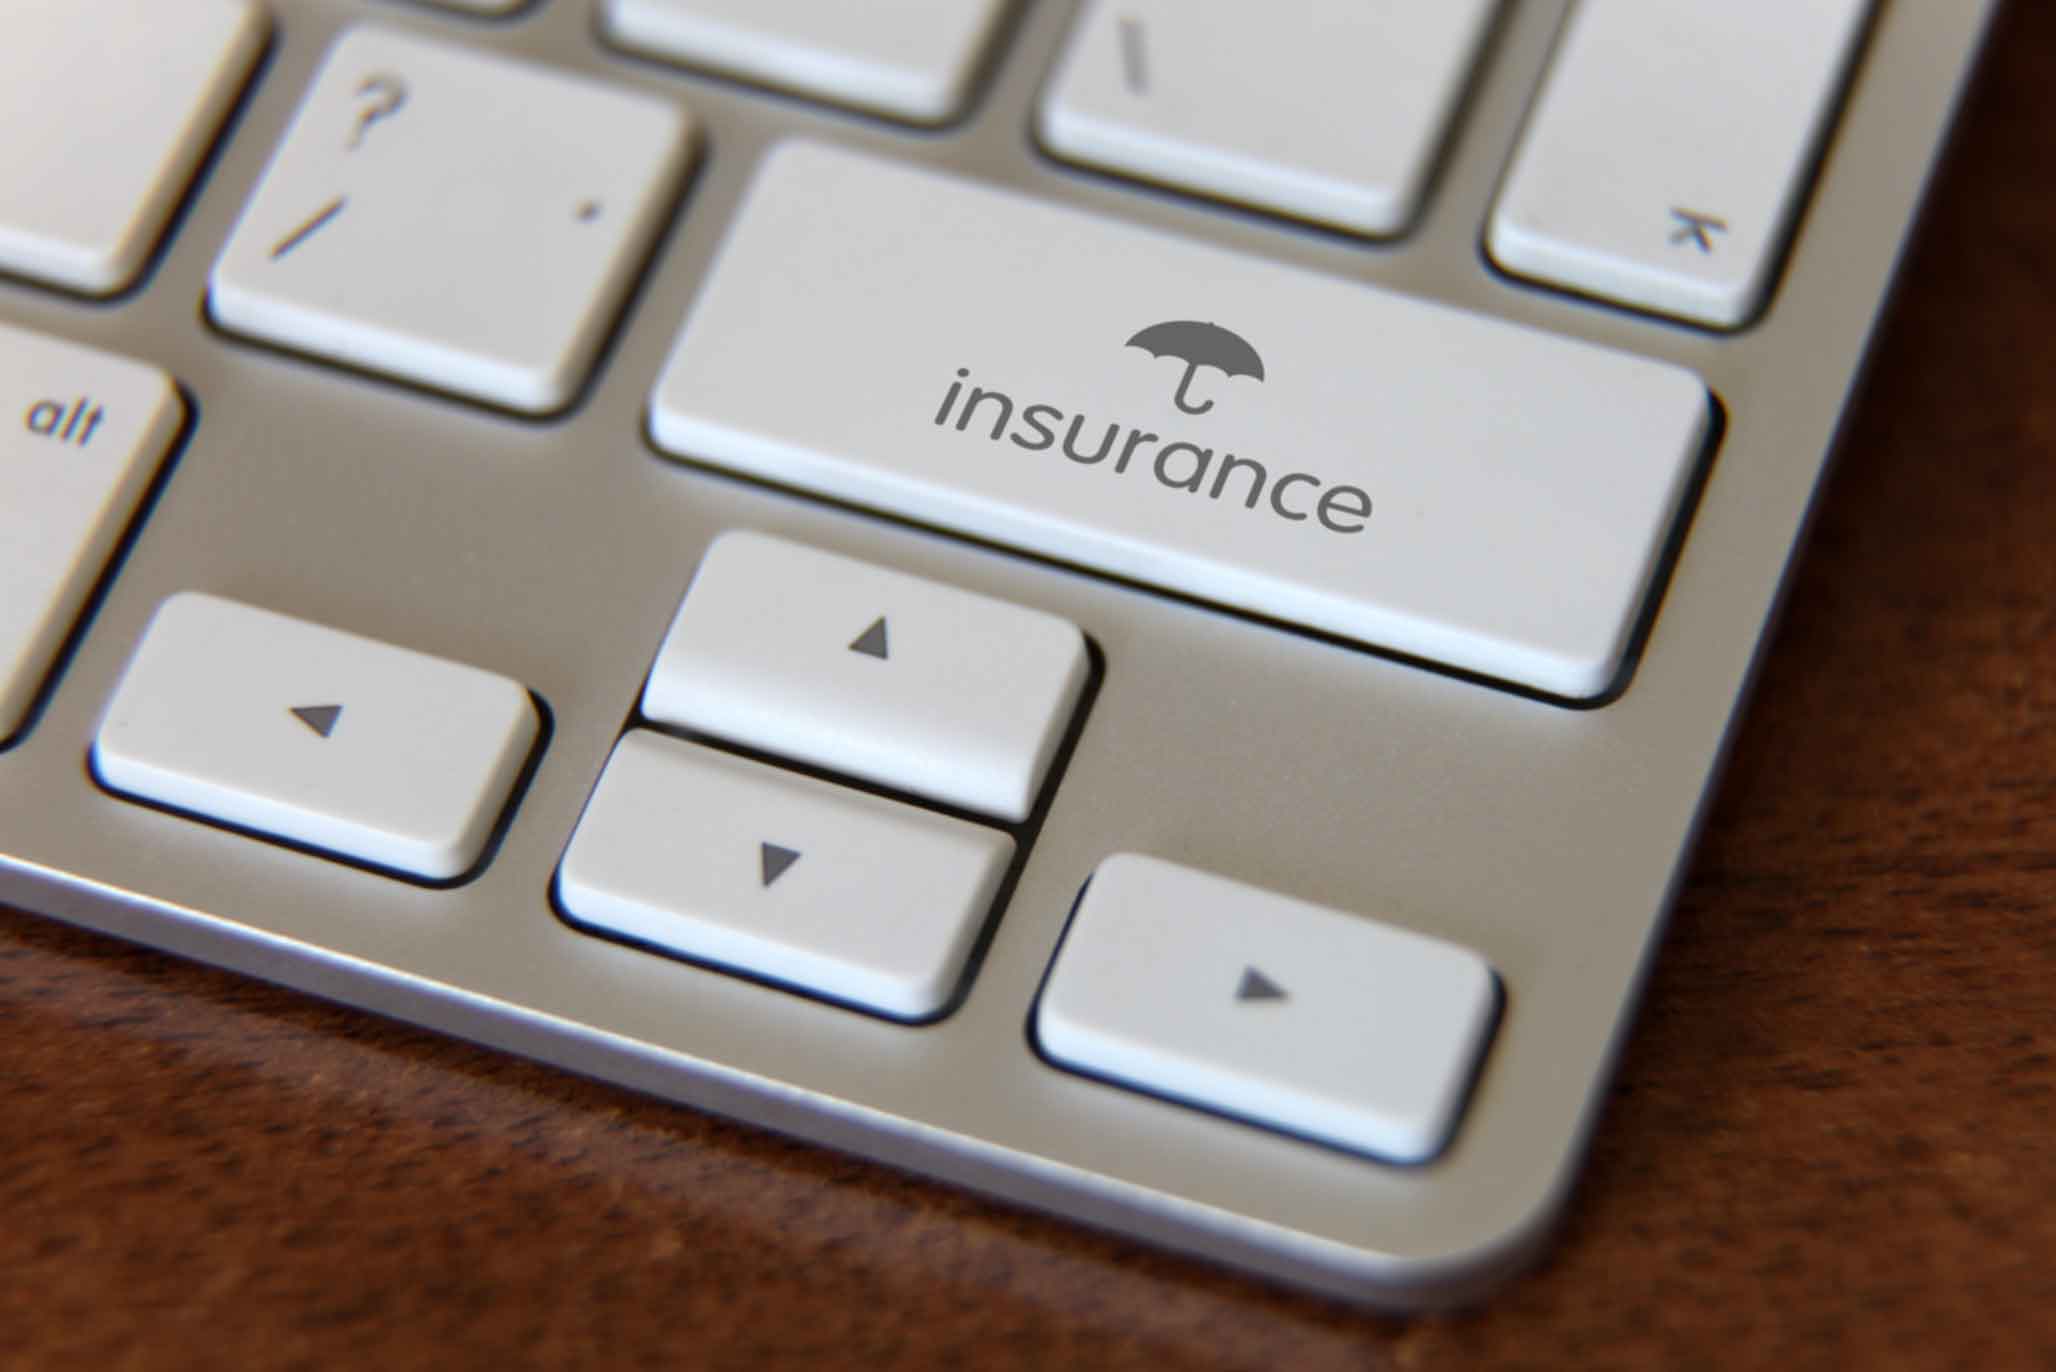 Basic insurance policies one must have